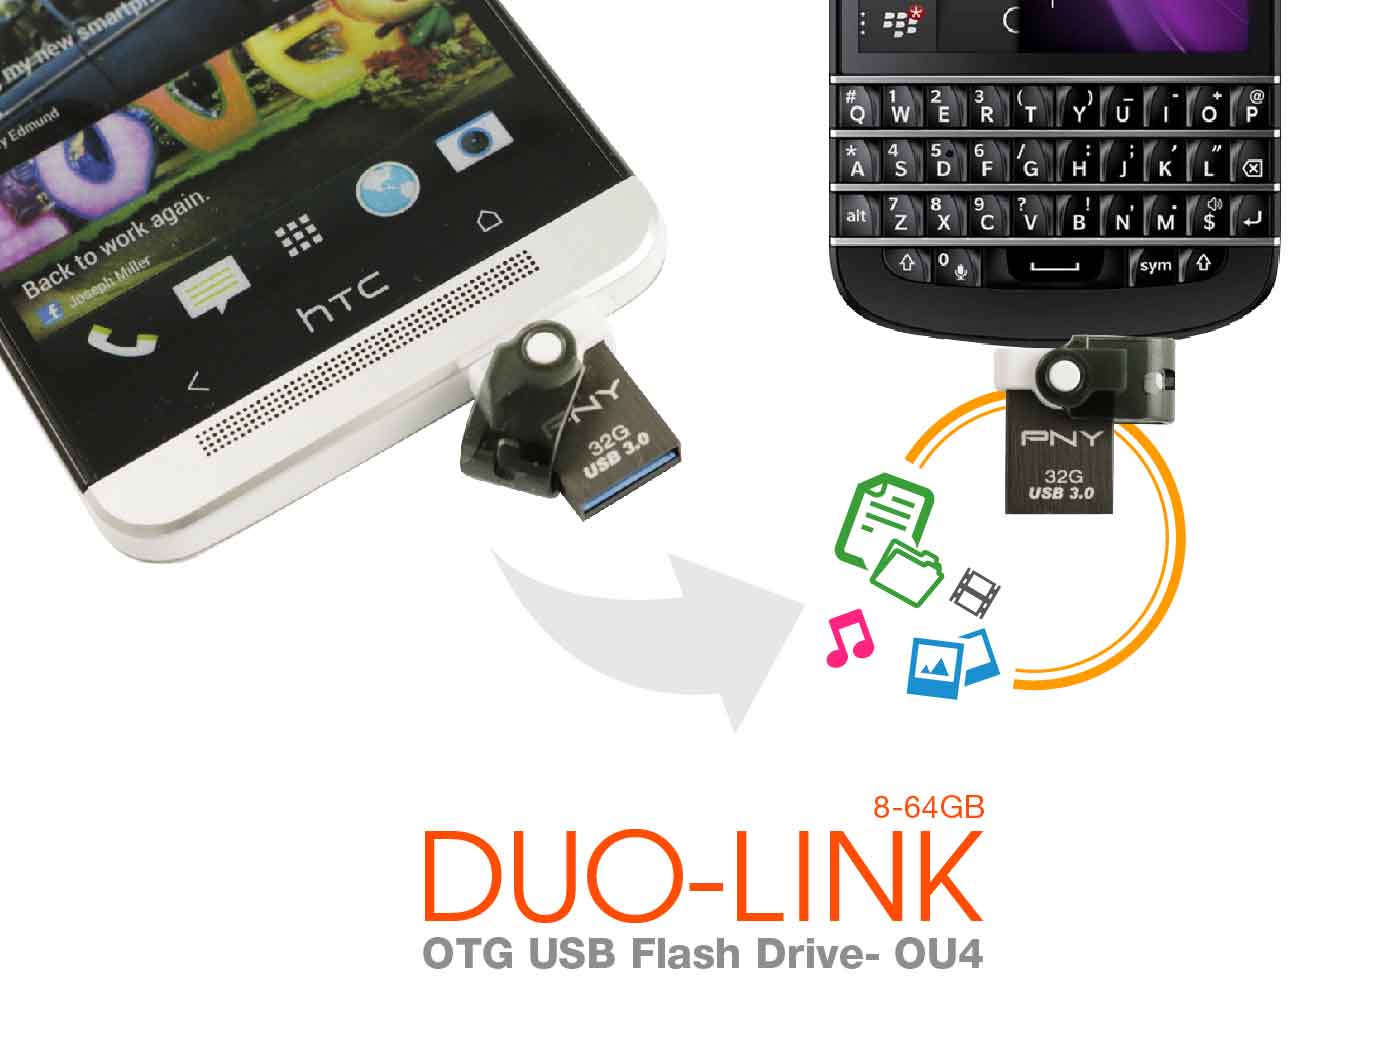 Hp Oppo Pny Duo Link Ou4 Otg Now Available In Lazada Ph